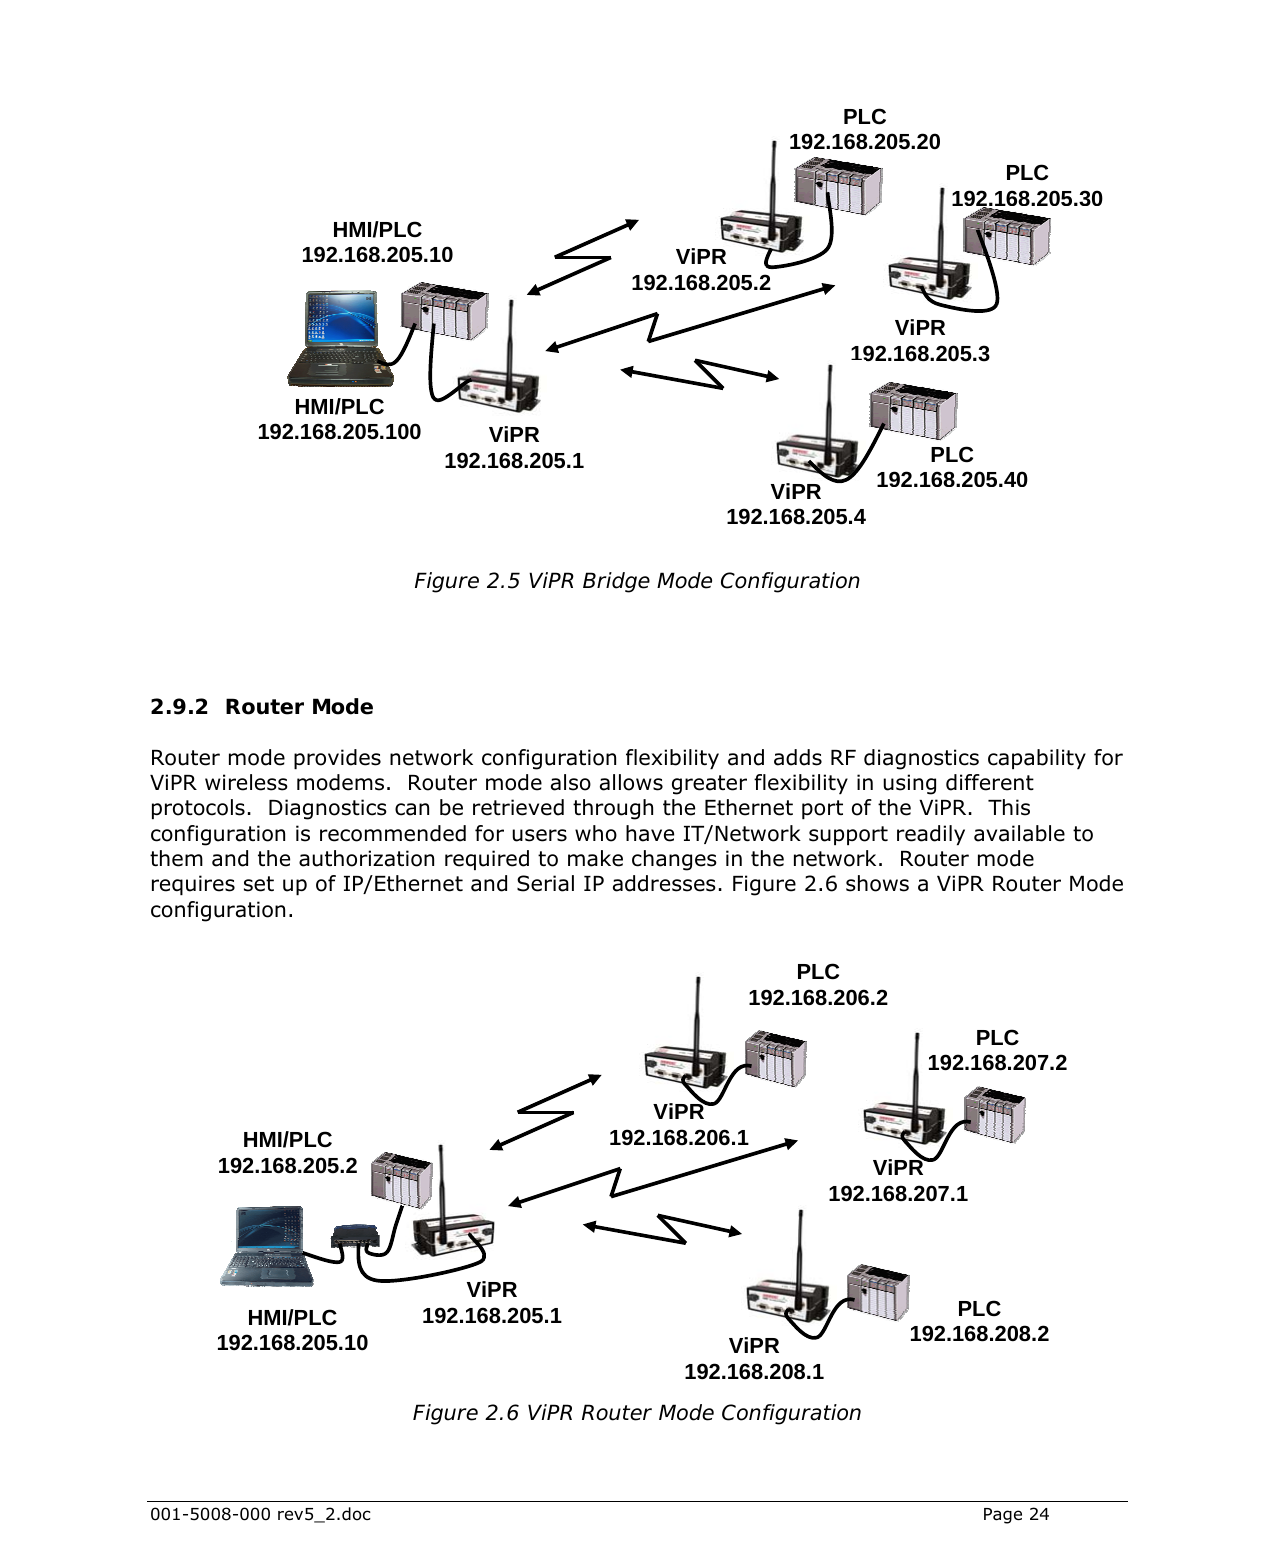  001-5008-000 rev5_2.doc    Page 24                    Figure 2.5 ViPR Bridge Mode Configuration    2.9.2 Router Mode Router mode provides network configuration flexibility and adds RF diagnostics capability for ViPR wireless modems.  Router mode also allows greater flexibility in using different protocols.  Diagnostics can be retrieved through the Ethernet port of the ViPR.  This configuration is recommended for users who have IT/Network support readily available to them and the authorization required to make changes in the network.  Router mode requires set up of IP/Ethernet and Serial IP addresses. Figure 2.6 shows a ViPR Router Mode configuration.                    Figure 2.6 ViPR Router Mode Configuration ViPR 192.168.205.1 ViPR 192.168.206.1 PLC 192.168.206.2 ViPR 192.168.207.1 PLC 192.168.207.2 ViPR 192.168.208.1 PLC 192.168.208.2 HMI/PLC 192.168.205.2 HMI/PLC 192.168.205.10 ViPR 192.168.205.1ViPR 192.168.205.3 PLC 192.168.205.40HMI/PLC 192.168.205.10HMI/PLC 192.168.205.100 PLC 192.168.205.30PLC 192.168.205.20ViPR 192.168.205.2ViPR 192.168.205.4 